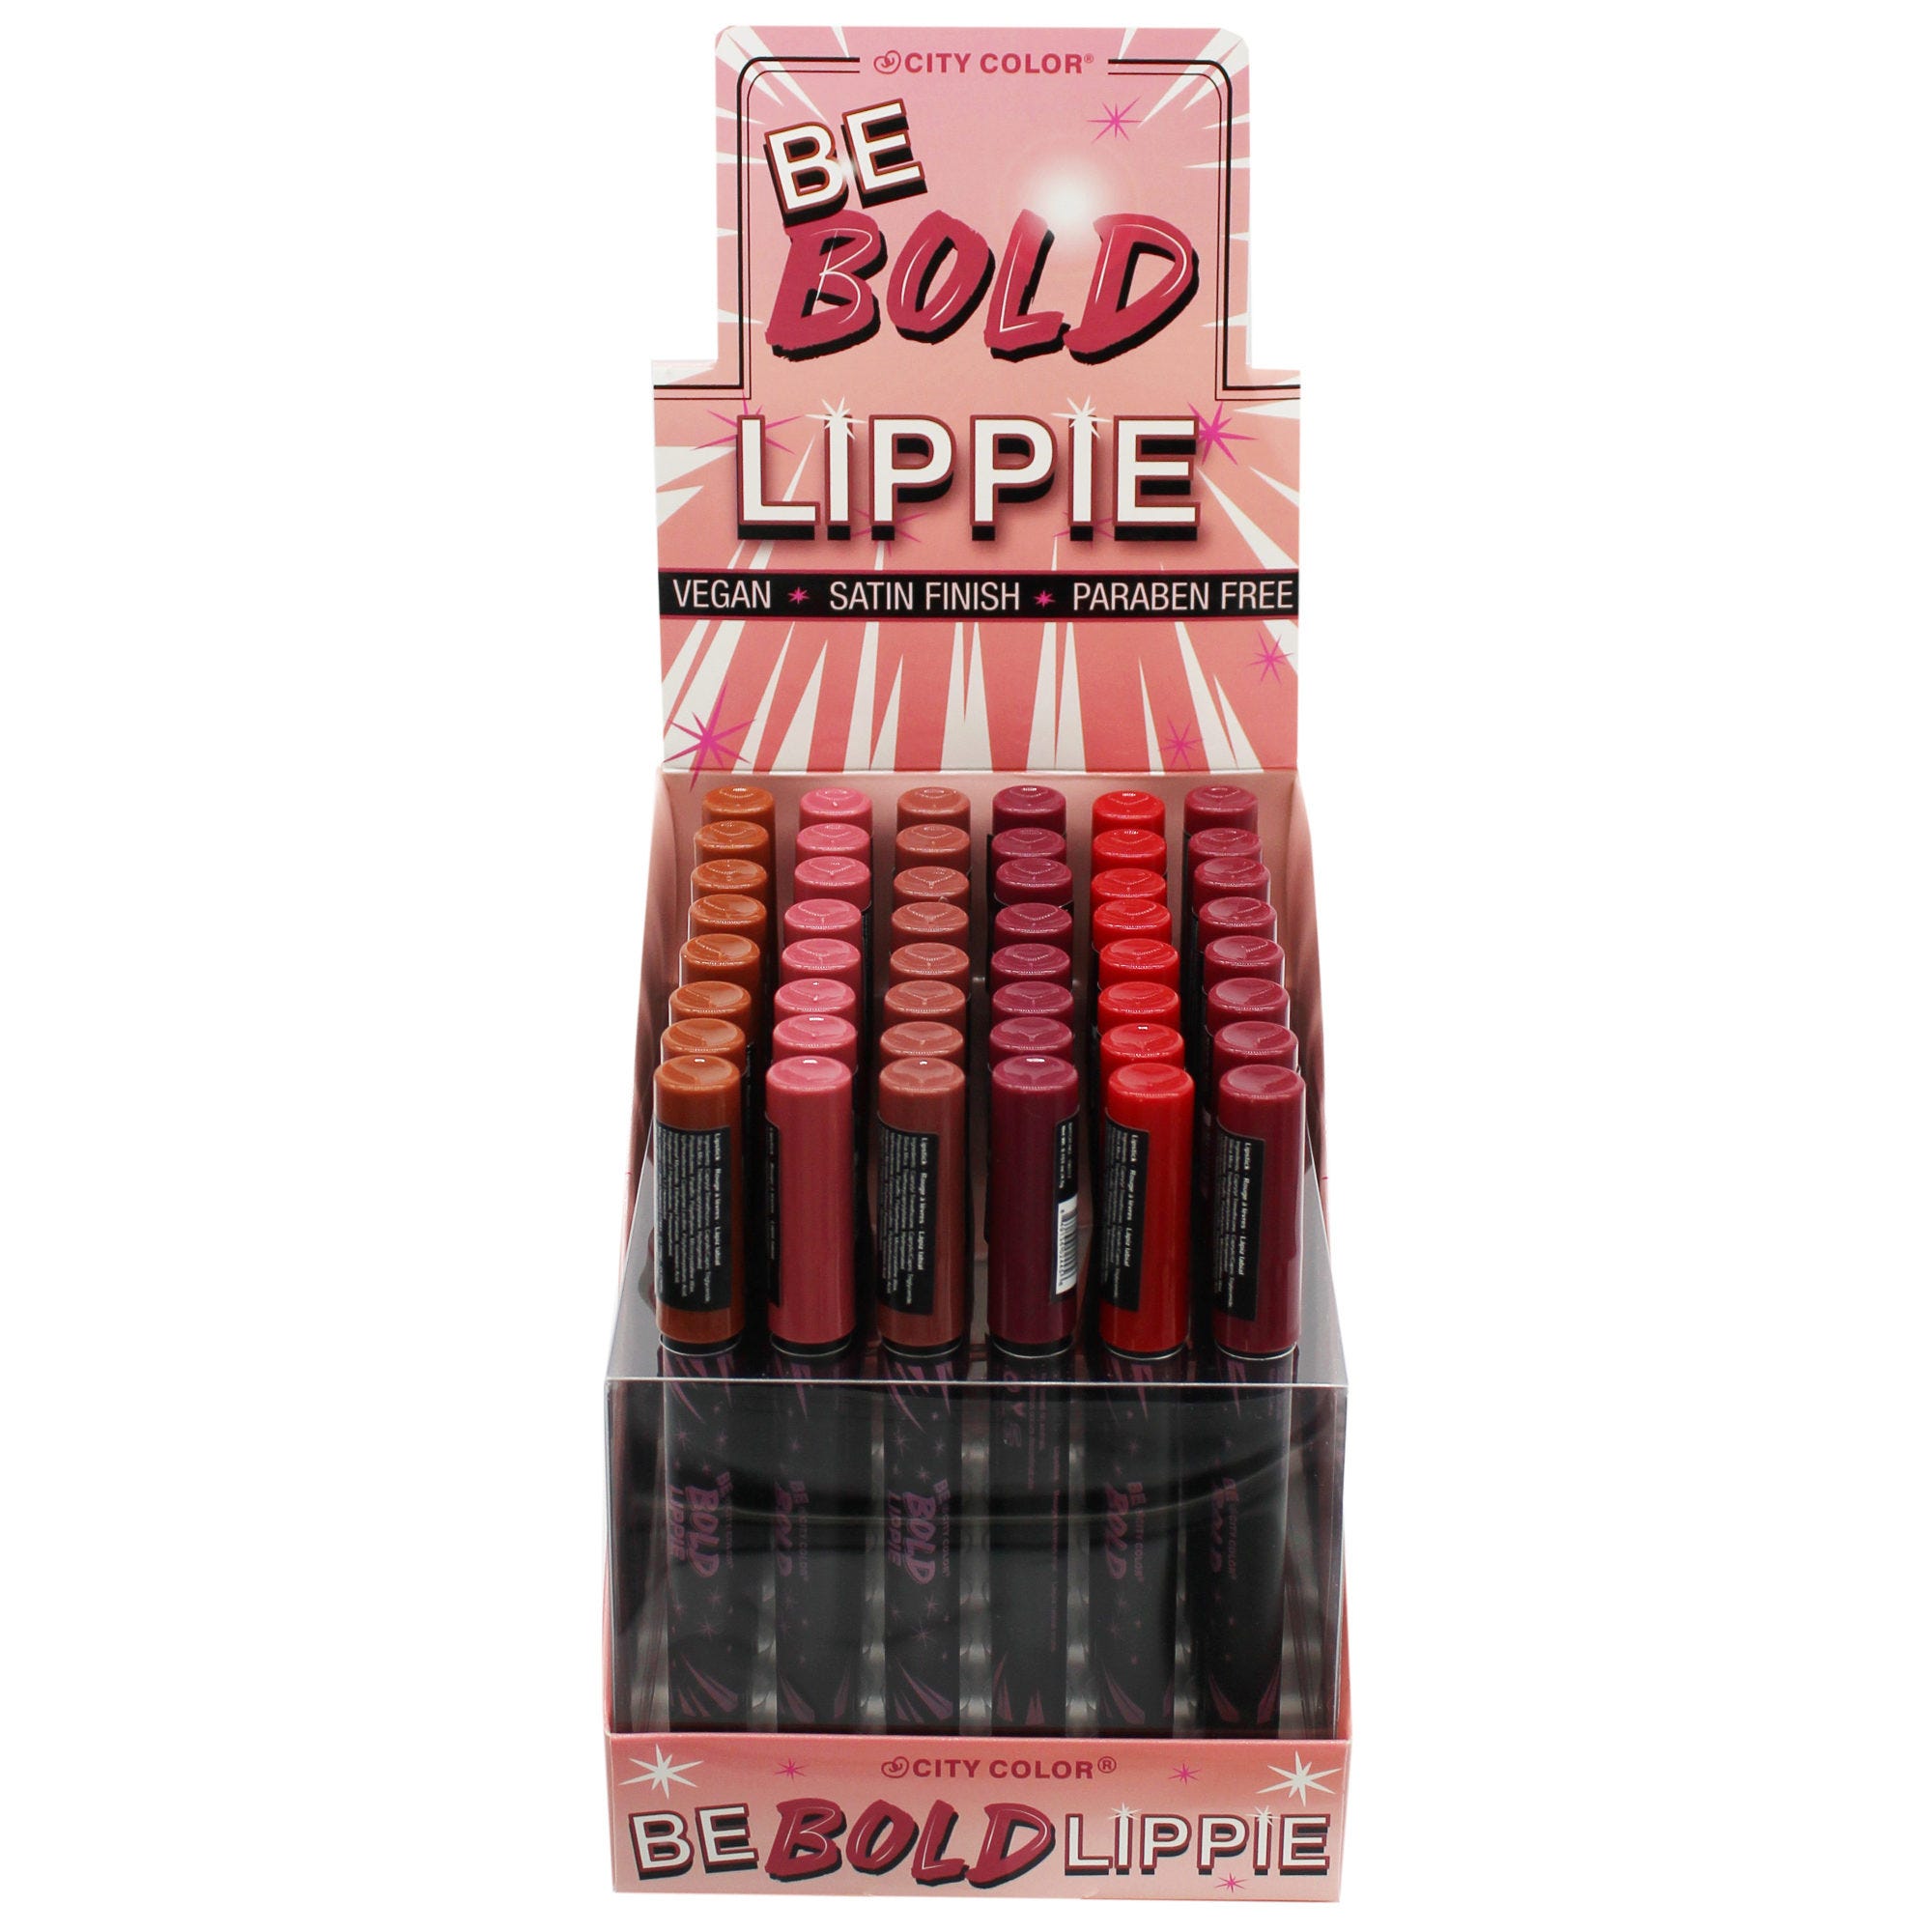 Be Bold Lippie Retractable Slim LIPSTICK in Assorted Shades in Countertop Display - Qty 48